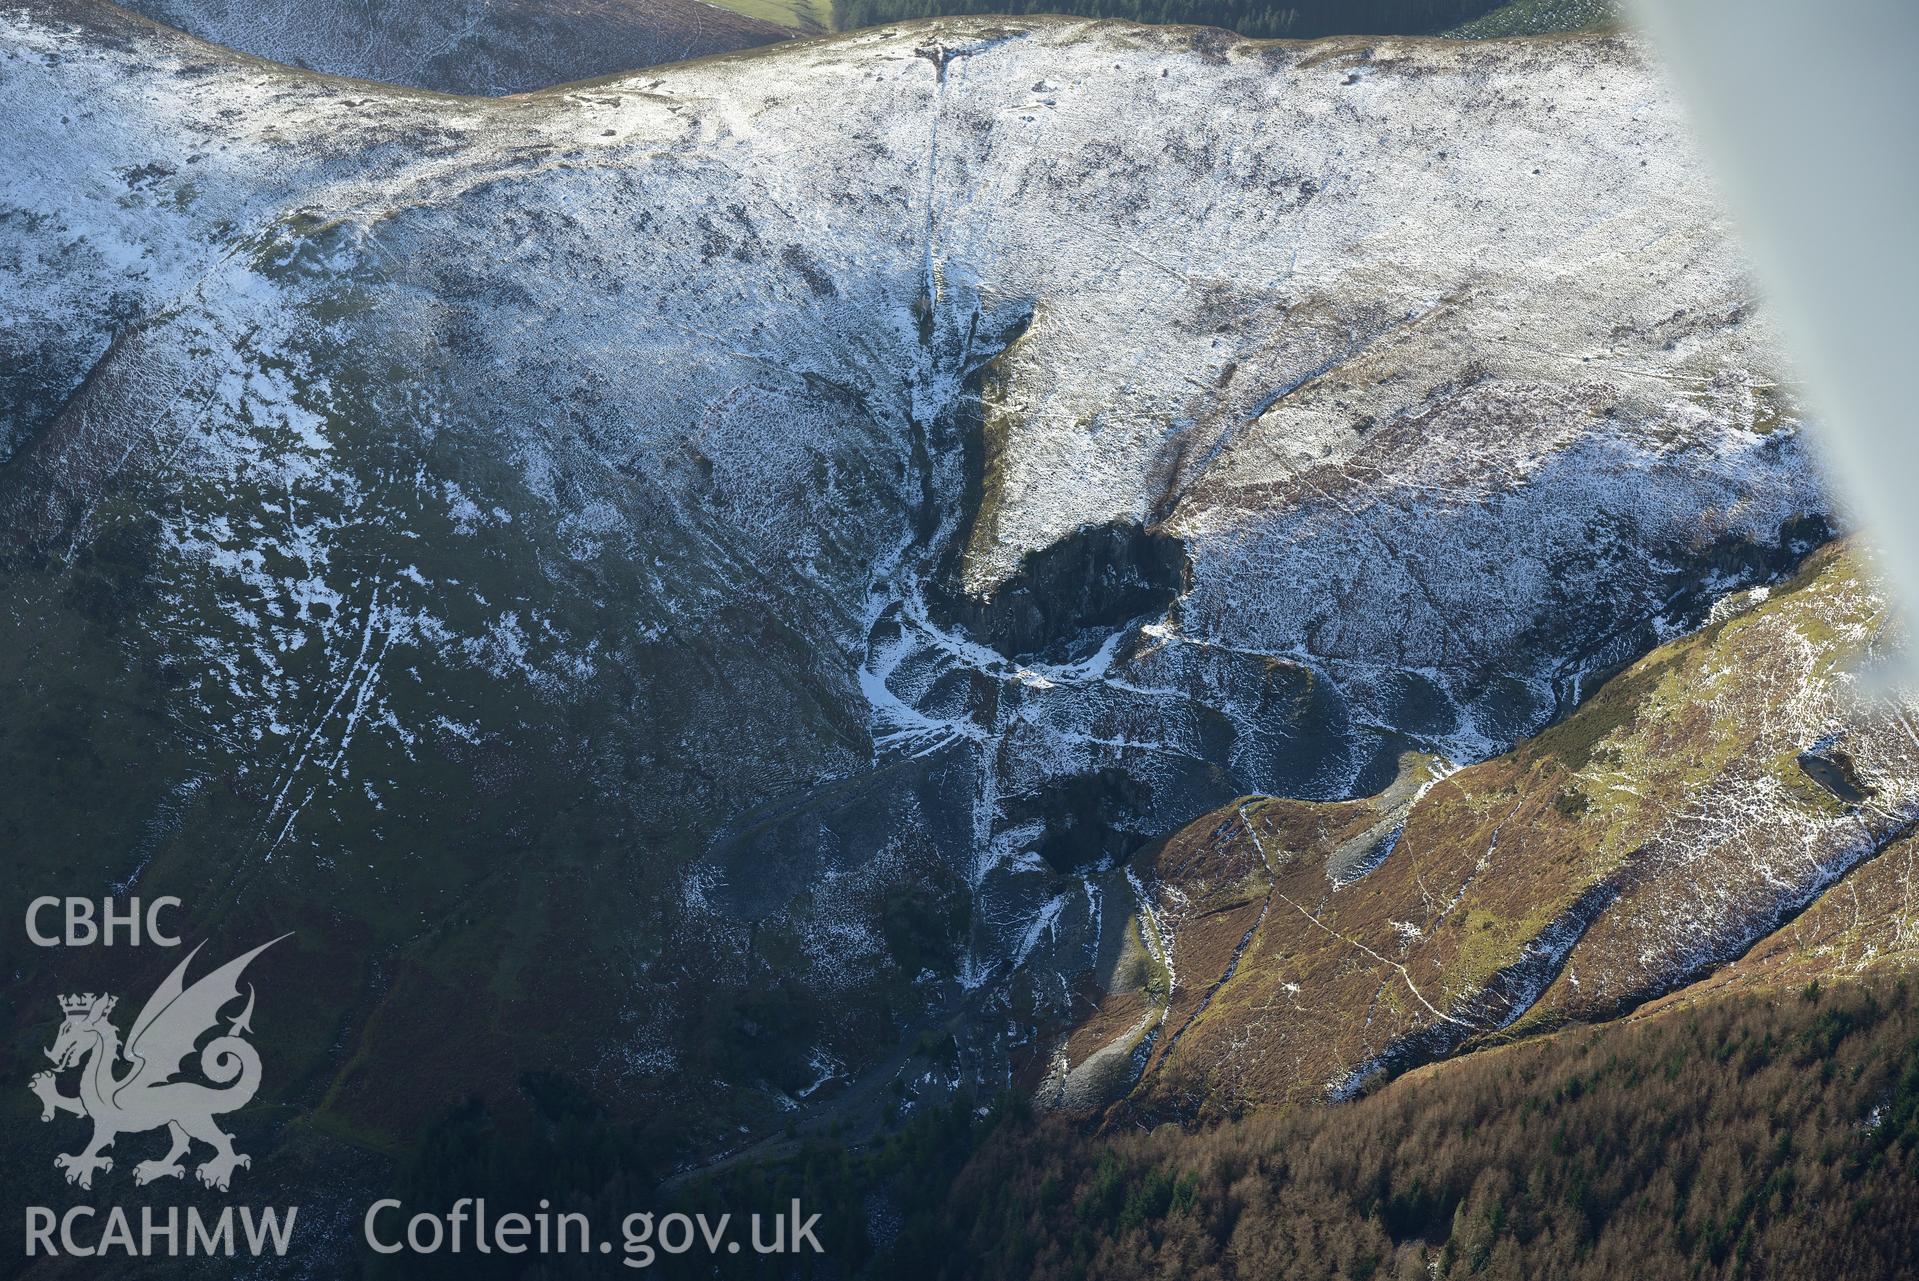 Minllyn slate and slab quarry, south west of Dinas Mawddwy, Dolgellau. Oblique aerial photograph taken during the Royal Commission's programme of archaeological aerial reconnaissance by Toby Driver on 4th February 2015.